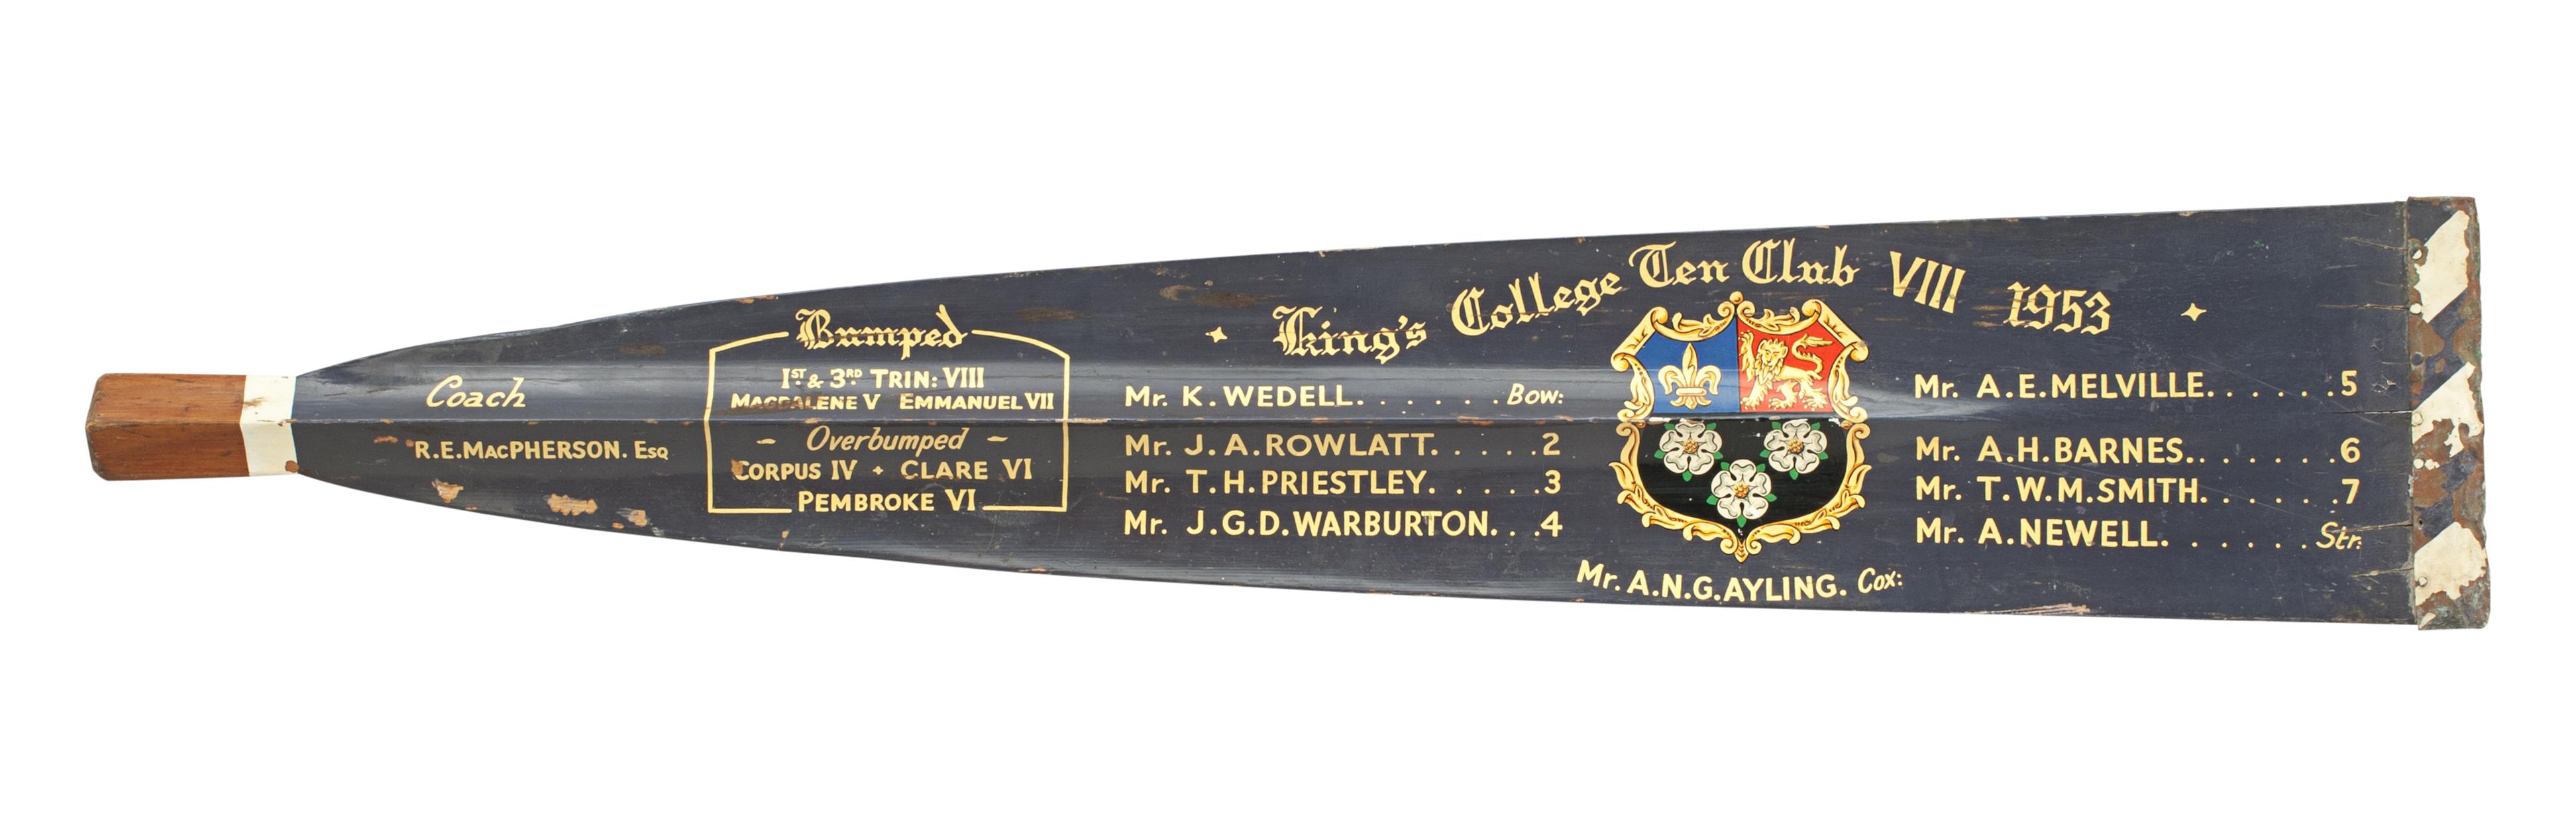 Cambridge Presentation Rowing Oar, Trophy Blade, 1953.
The oar is an original traditional King's College 'Ten Club VIII' (Cambridge University) presentation rowing oar tip with calligraphy and college insignia. The paint and writing on the trophy